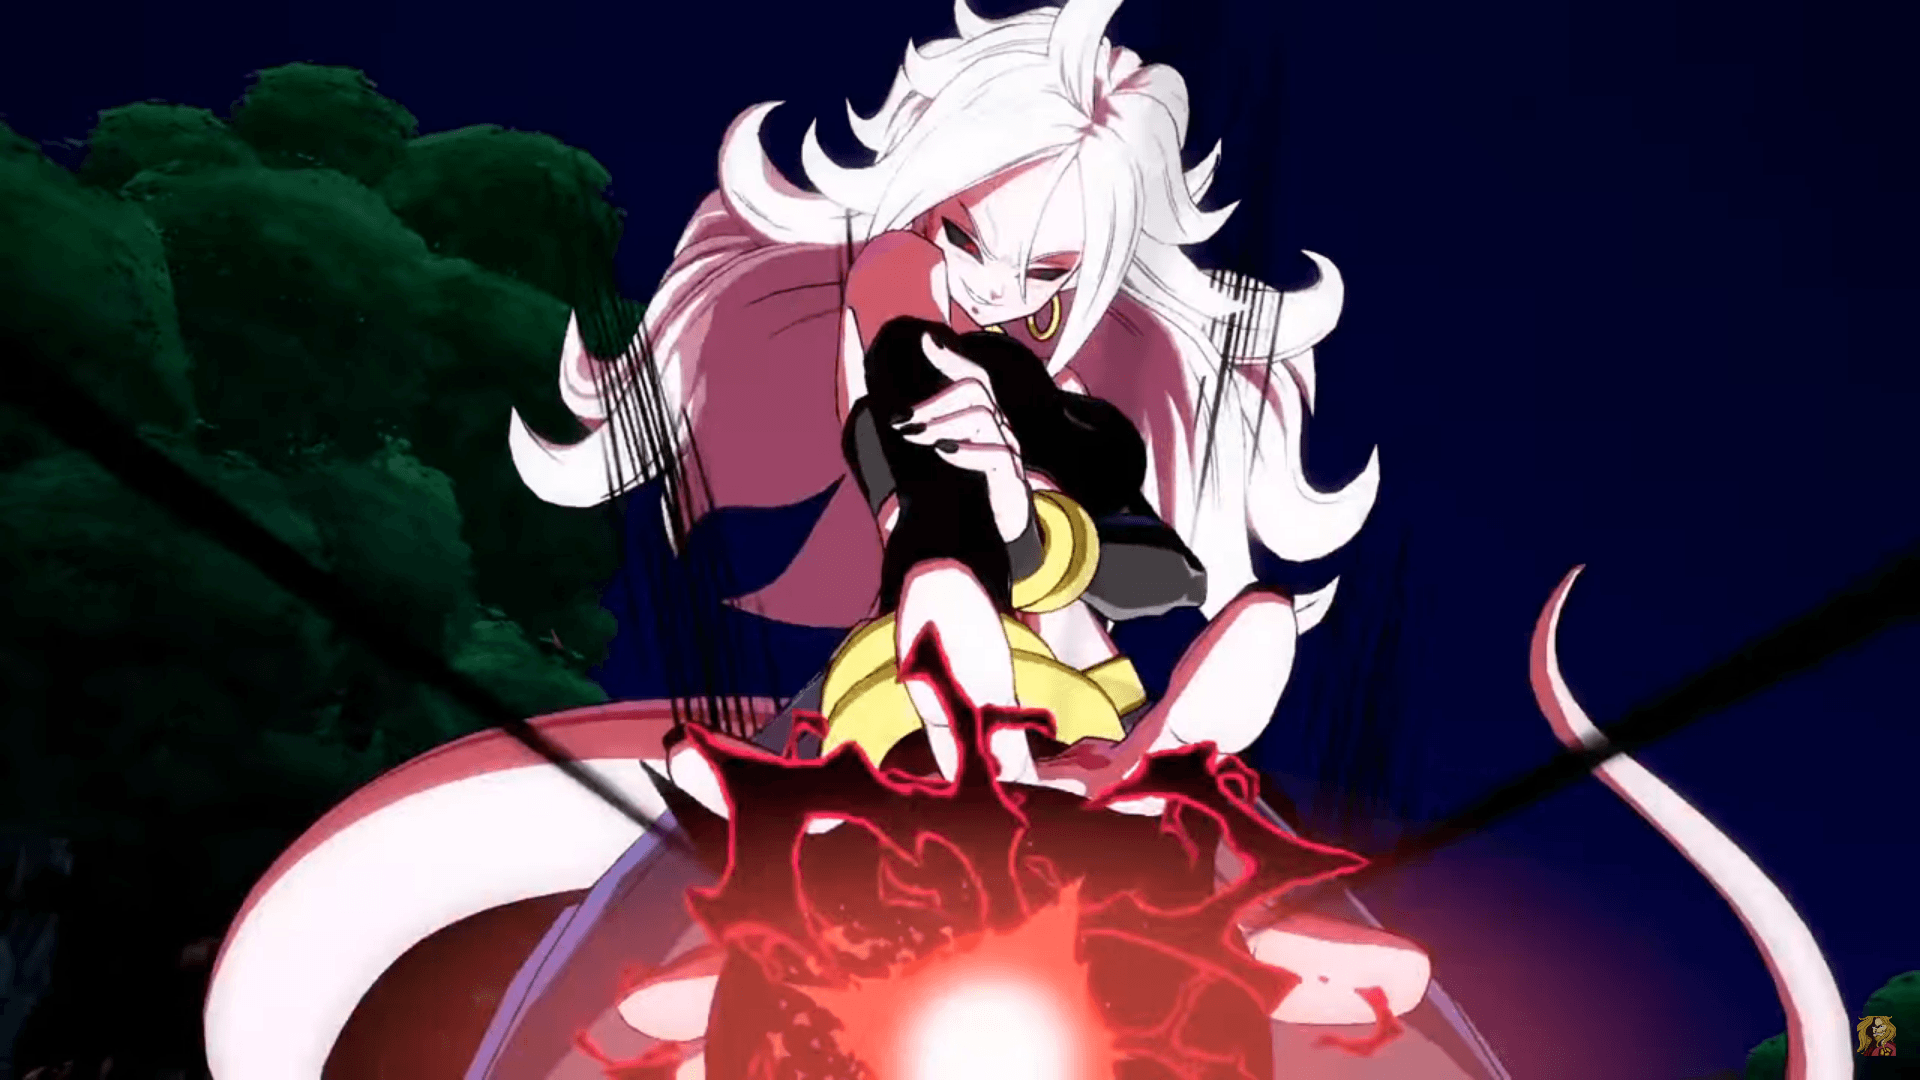 Android 21 Wallpaper Free Android 21 Background